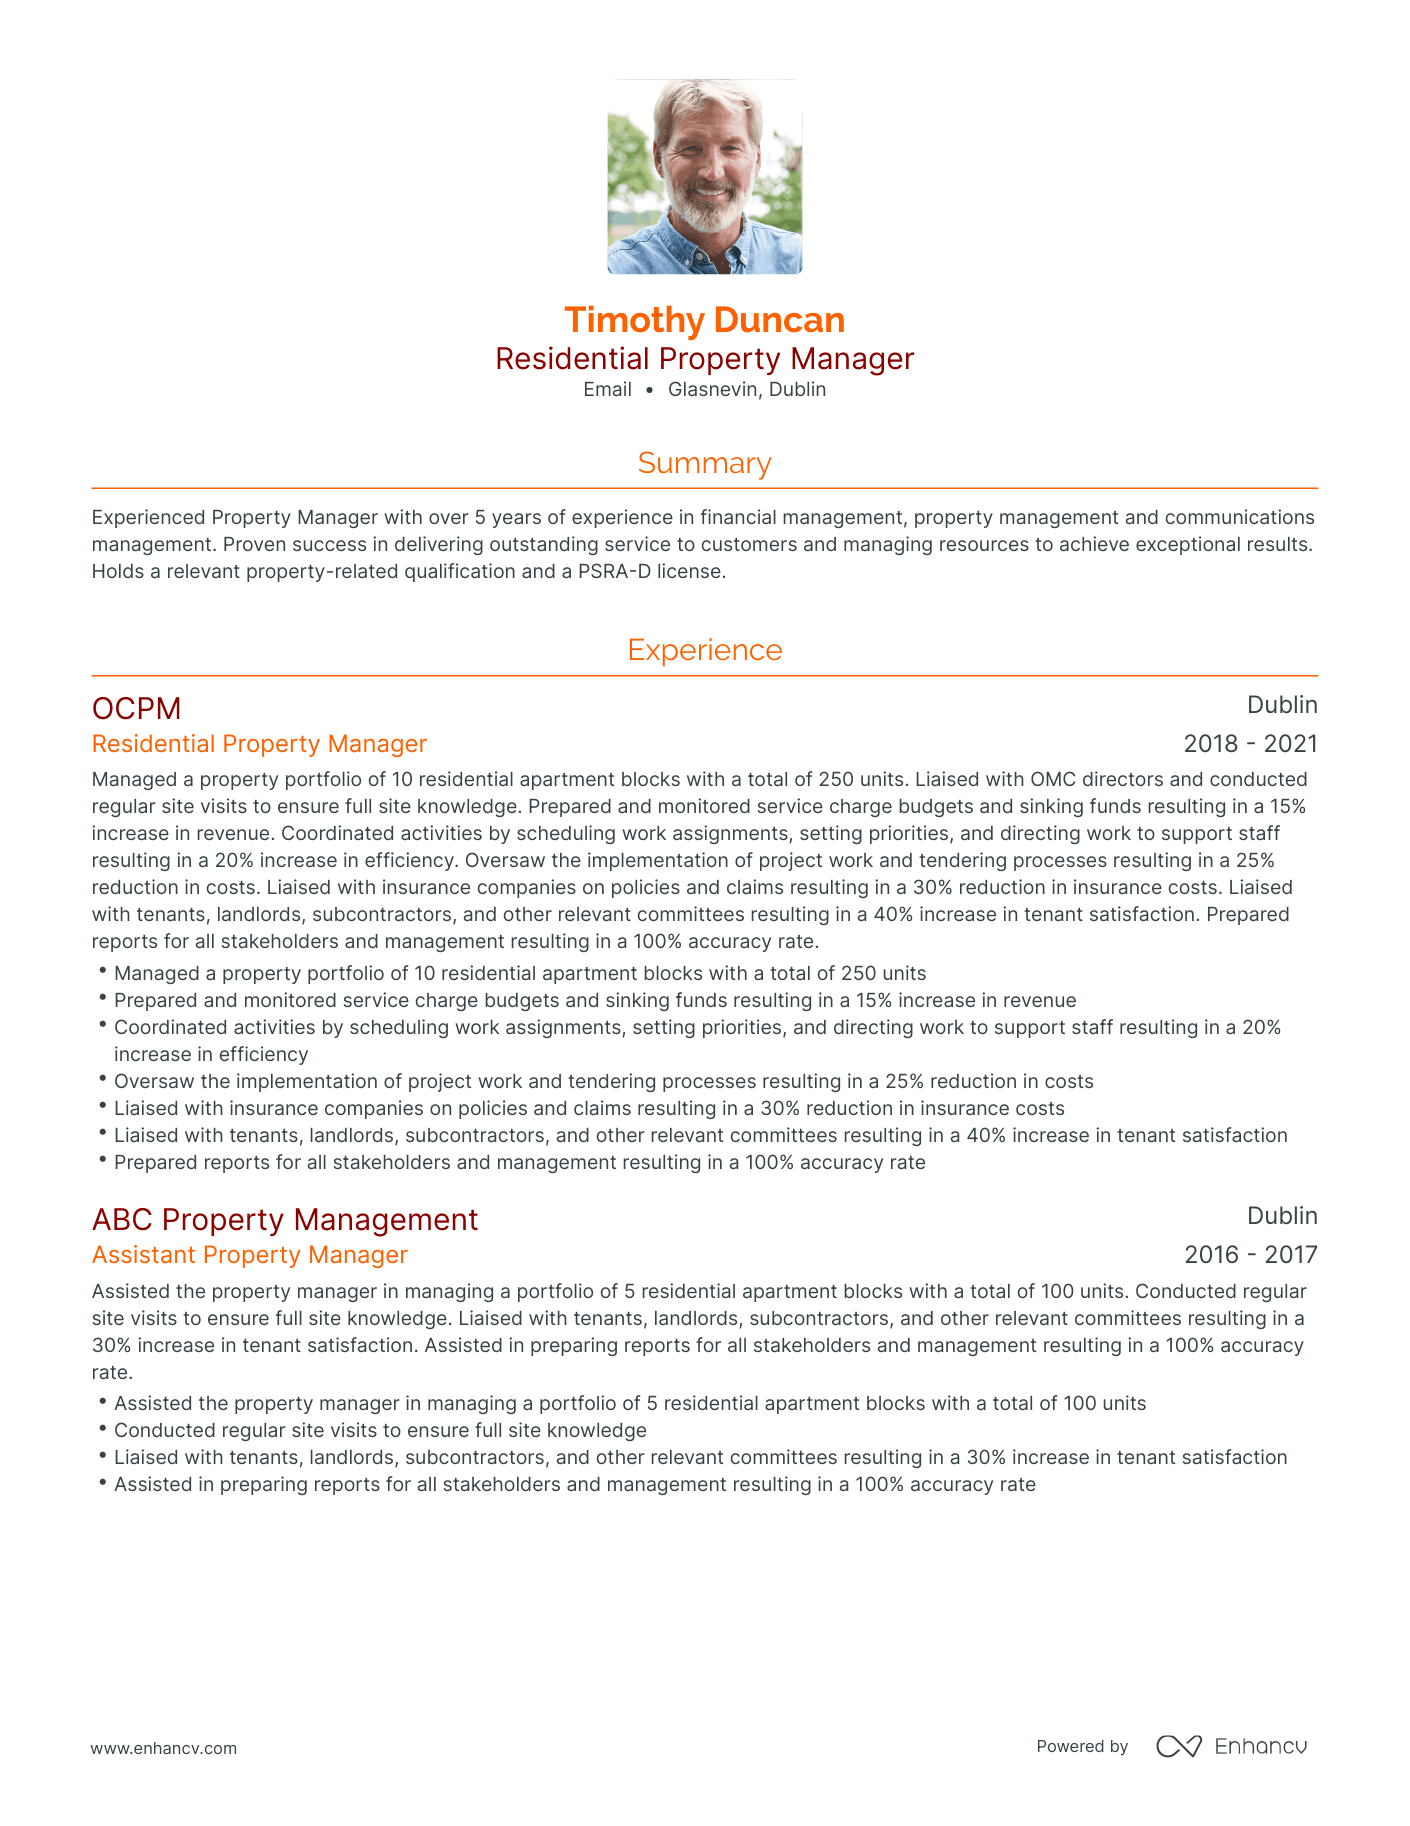 Traditional Residential Property Manager Resume Template